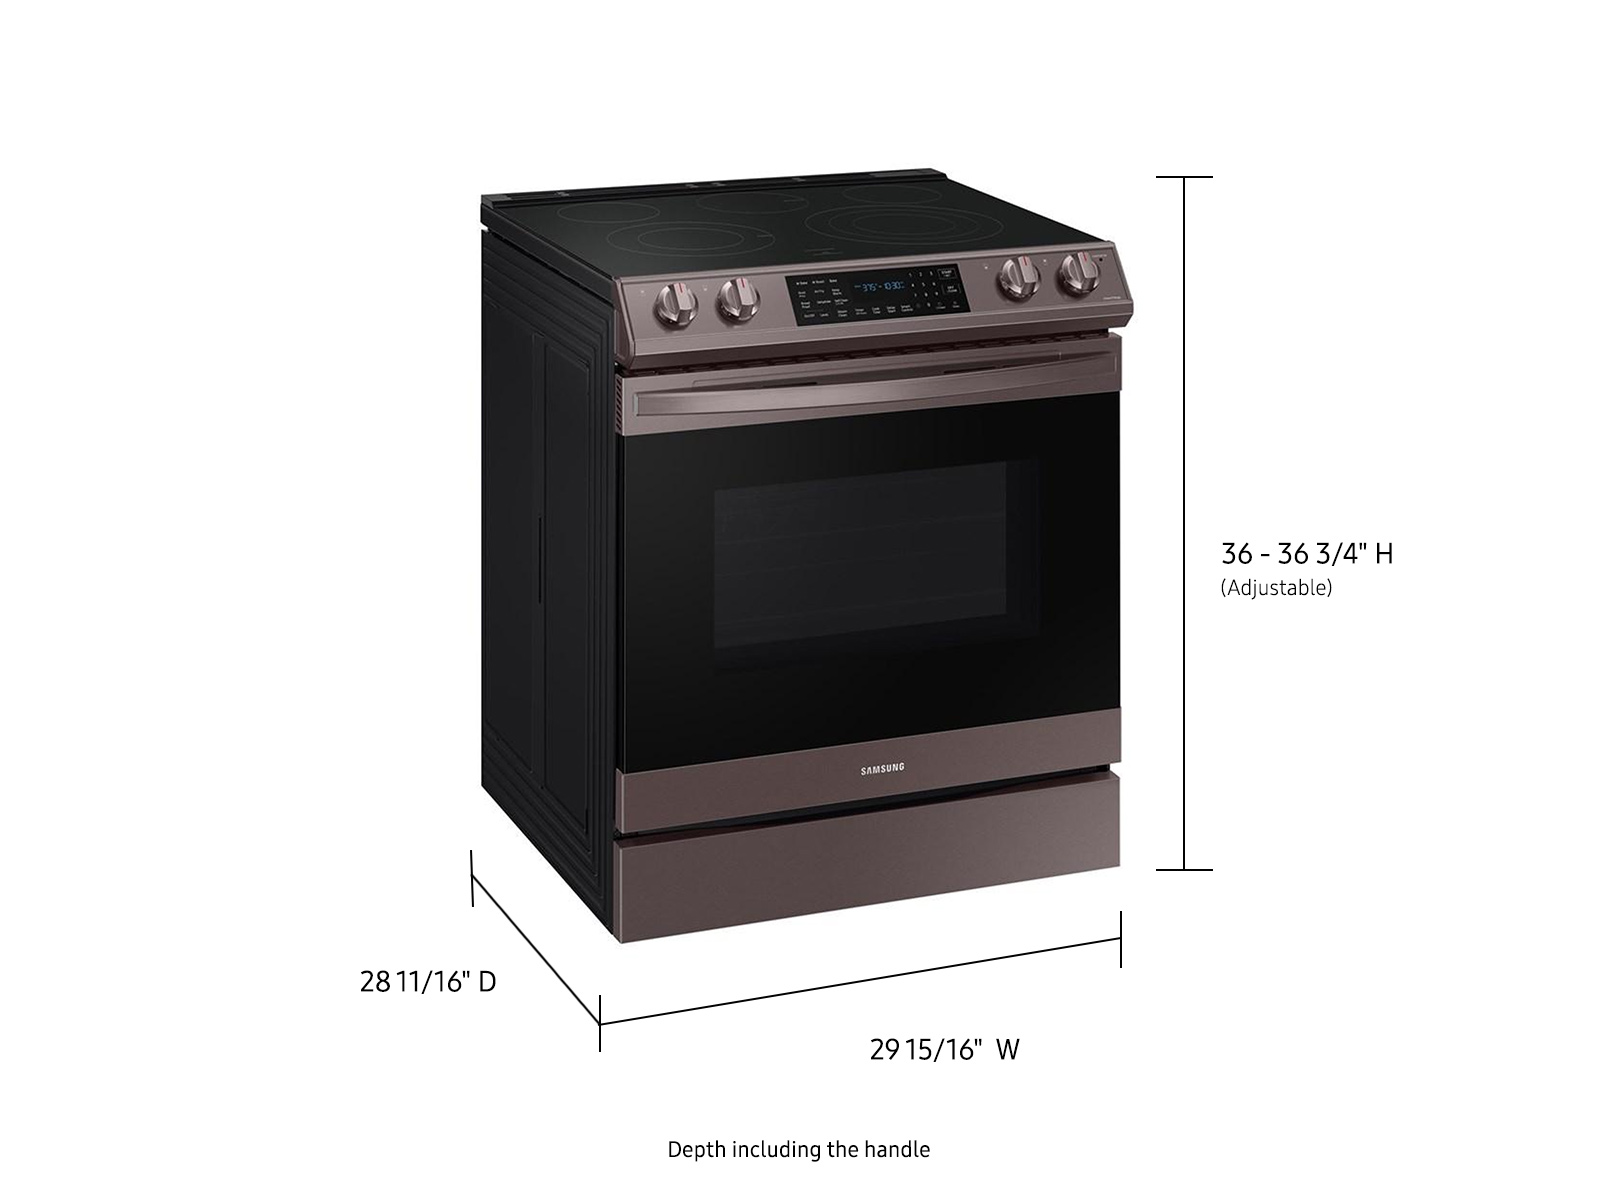 Samsung 6.3 Cu. ft. Smart Slide-in Electric Range with Air Fry & Convection in Stainless Steel